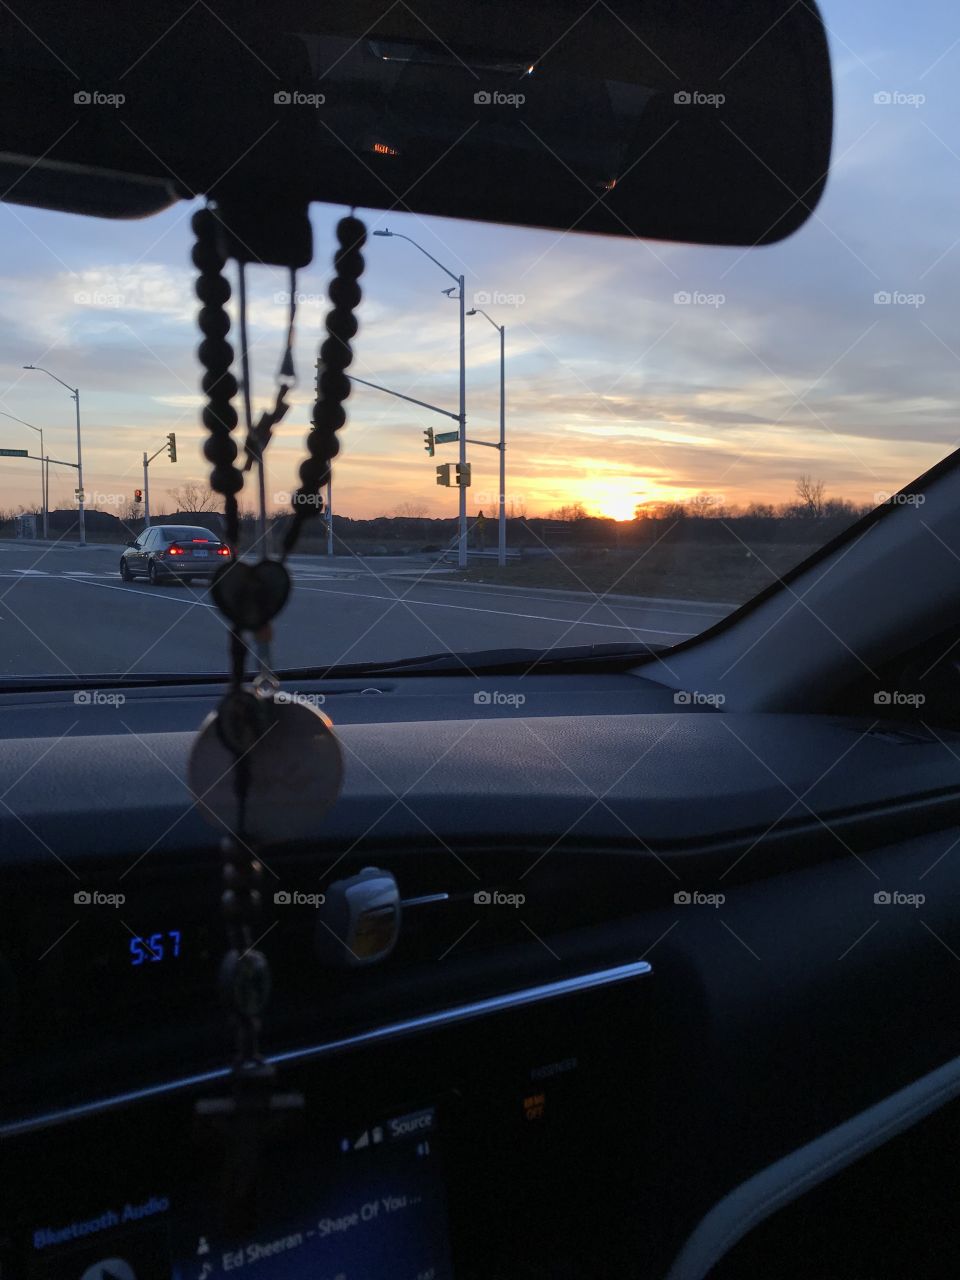 Driving while the sun goes down not being in sight anymore makes you feel you want to catch it rapidly the next day with new ideas and progress